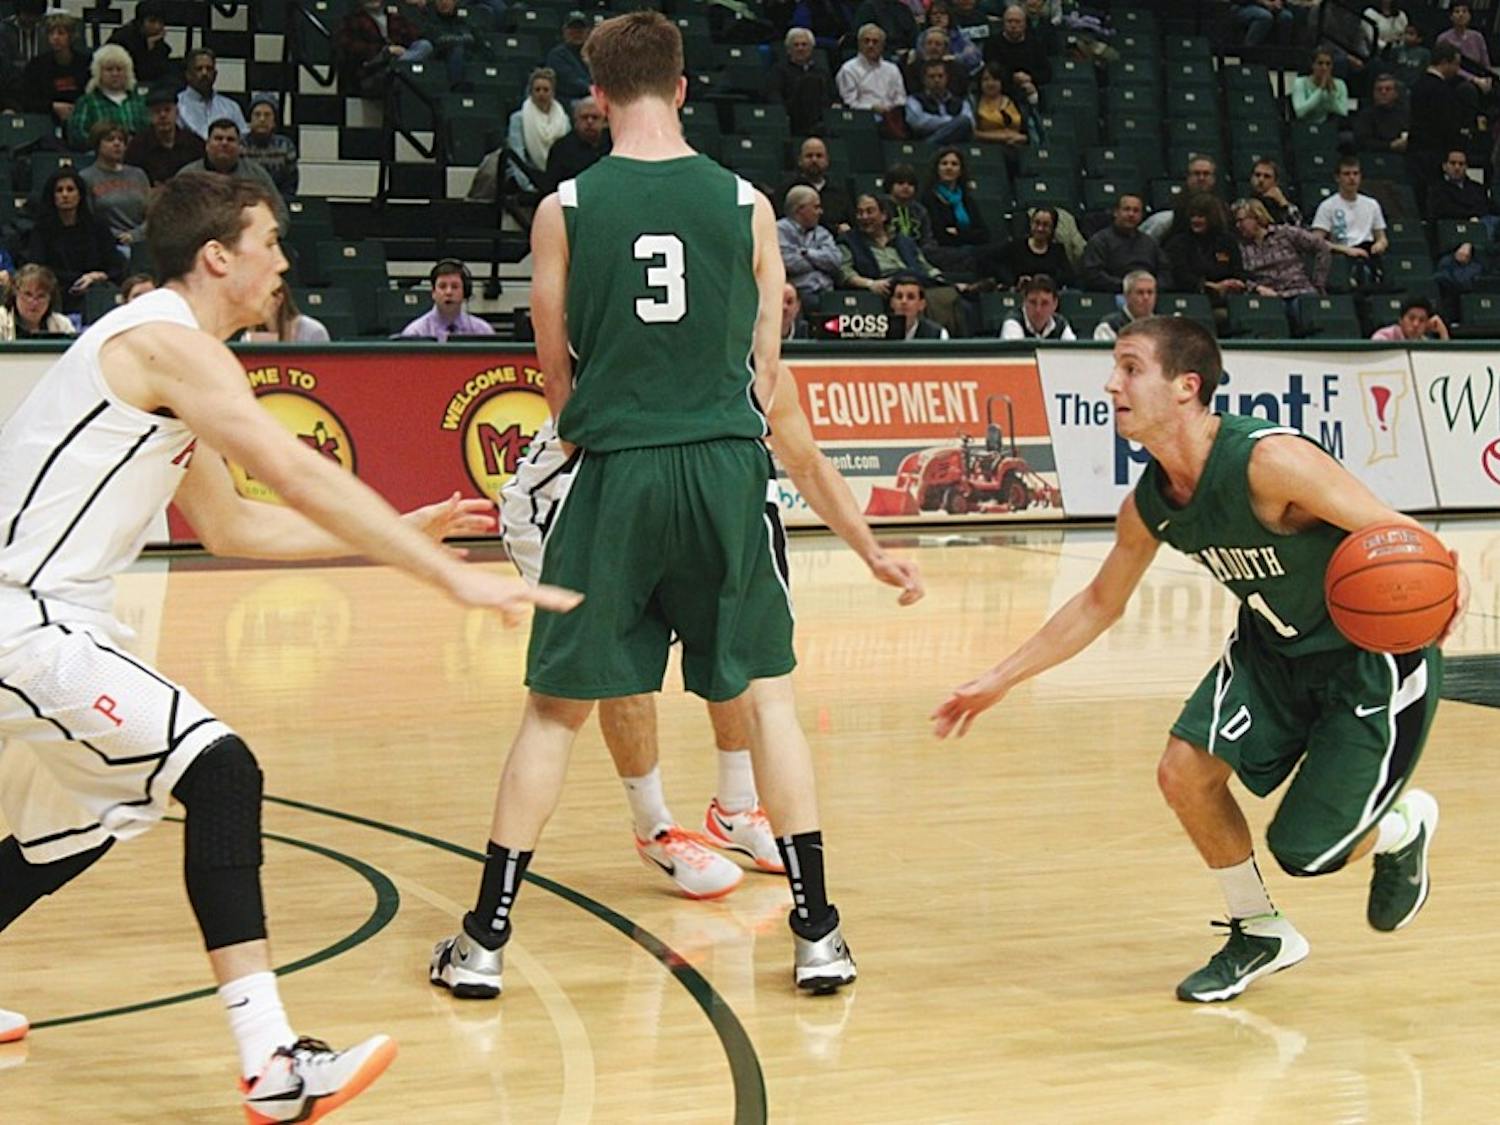 The men’s basketball team had a disappointing road weekend, losing twice.